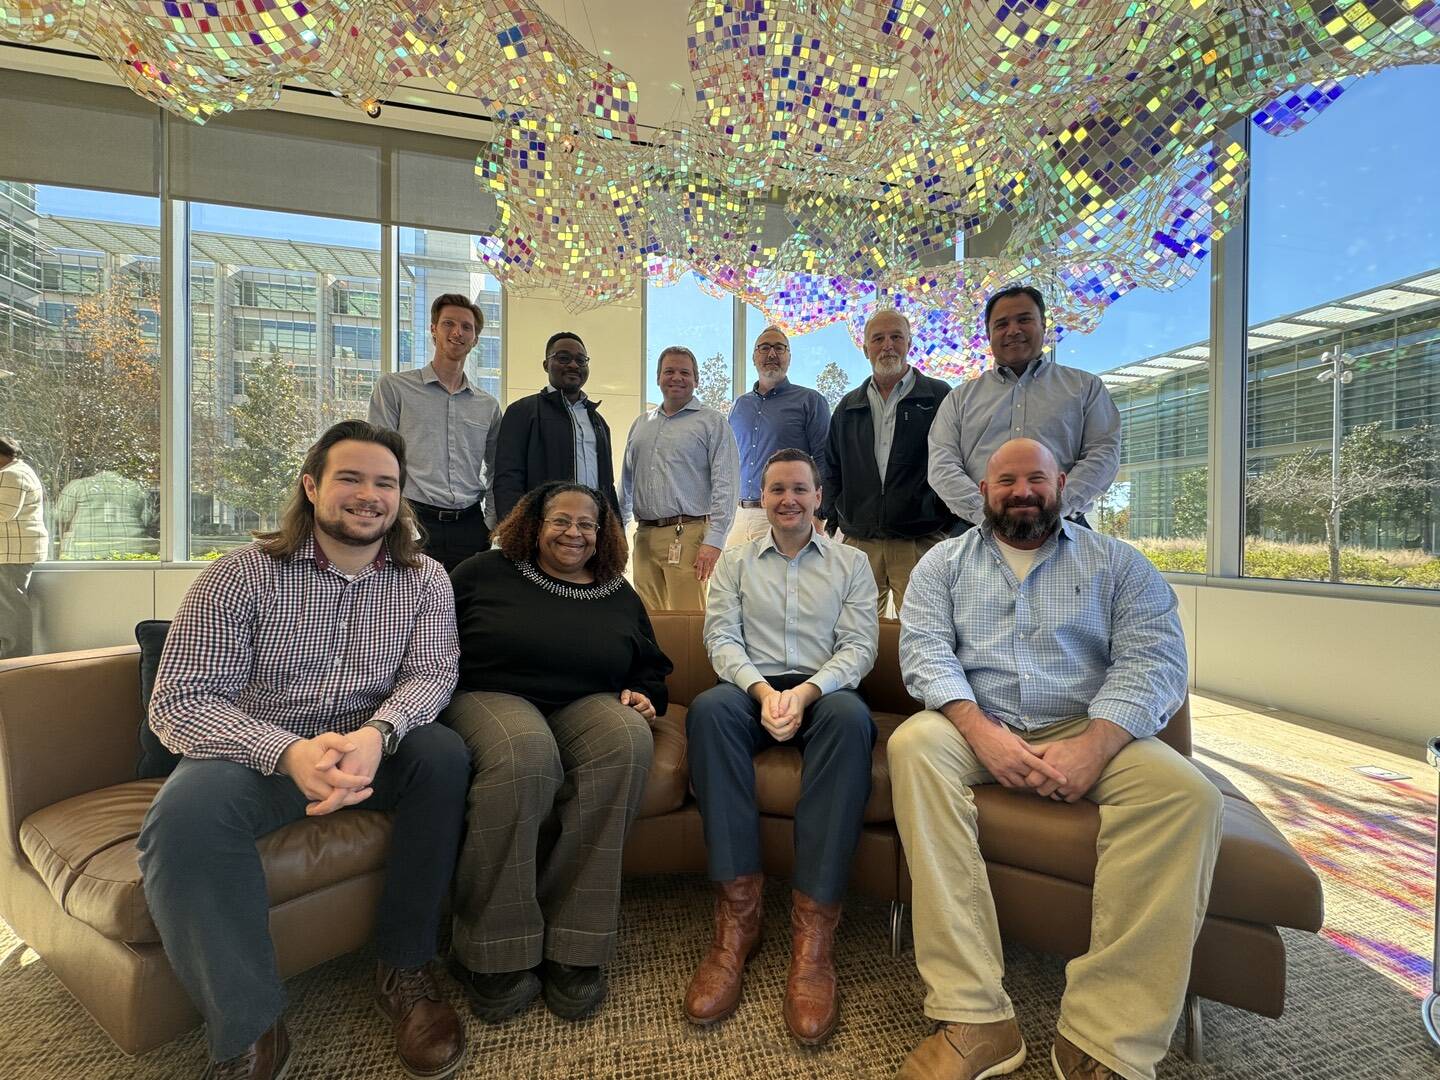 Some members of the Houston-based lithium wells team. Pictured (left to right) are: Back row  Dylan Vint, Afolabi Amodu, Daniel Mathewson, Ziad Haddad, Tim Greene, Jonathan Rodriguez. Front row: William Carr, Erica Hudson, Chase Holub, Jeffrey Tupa.